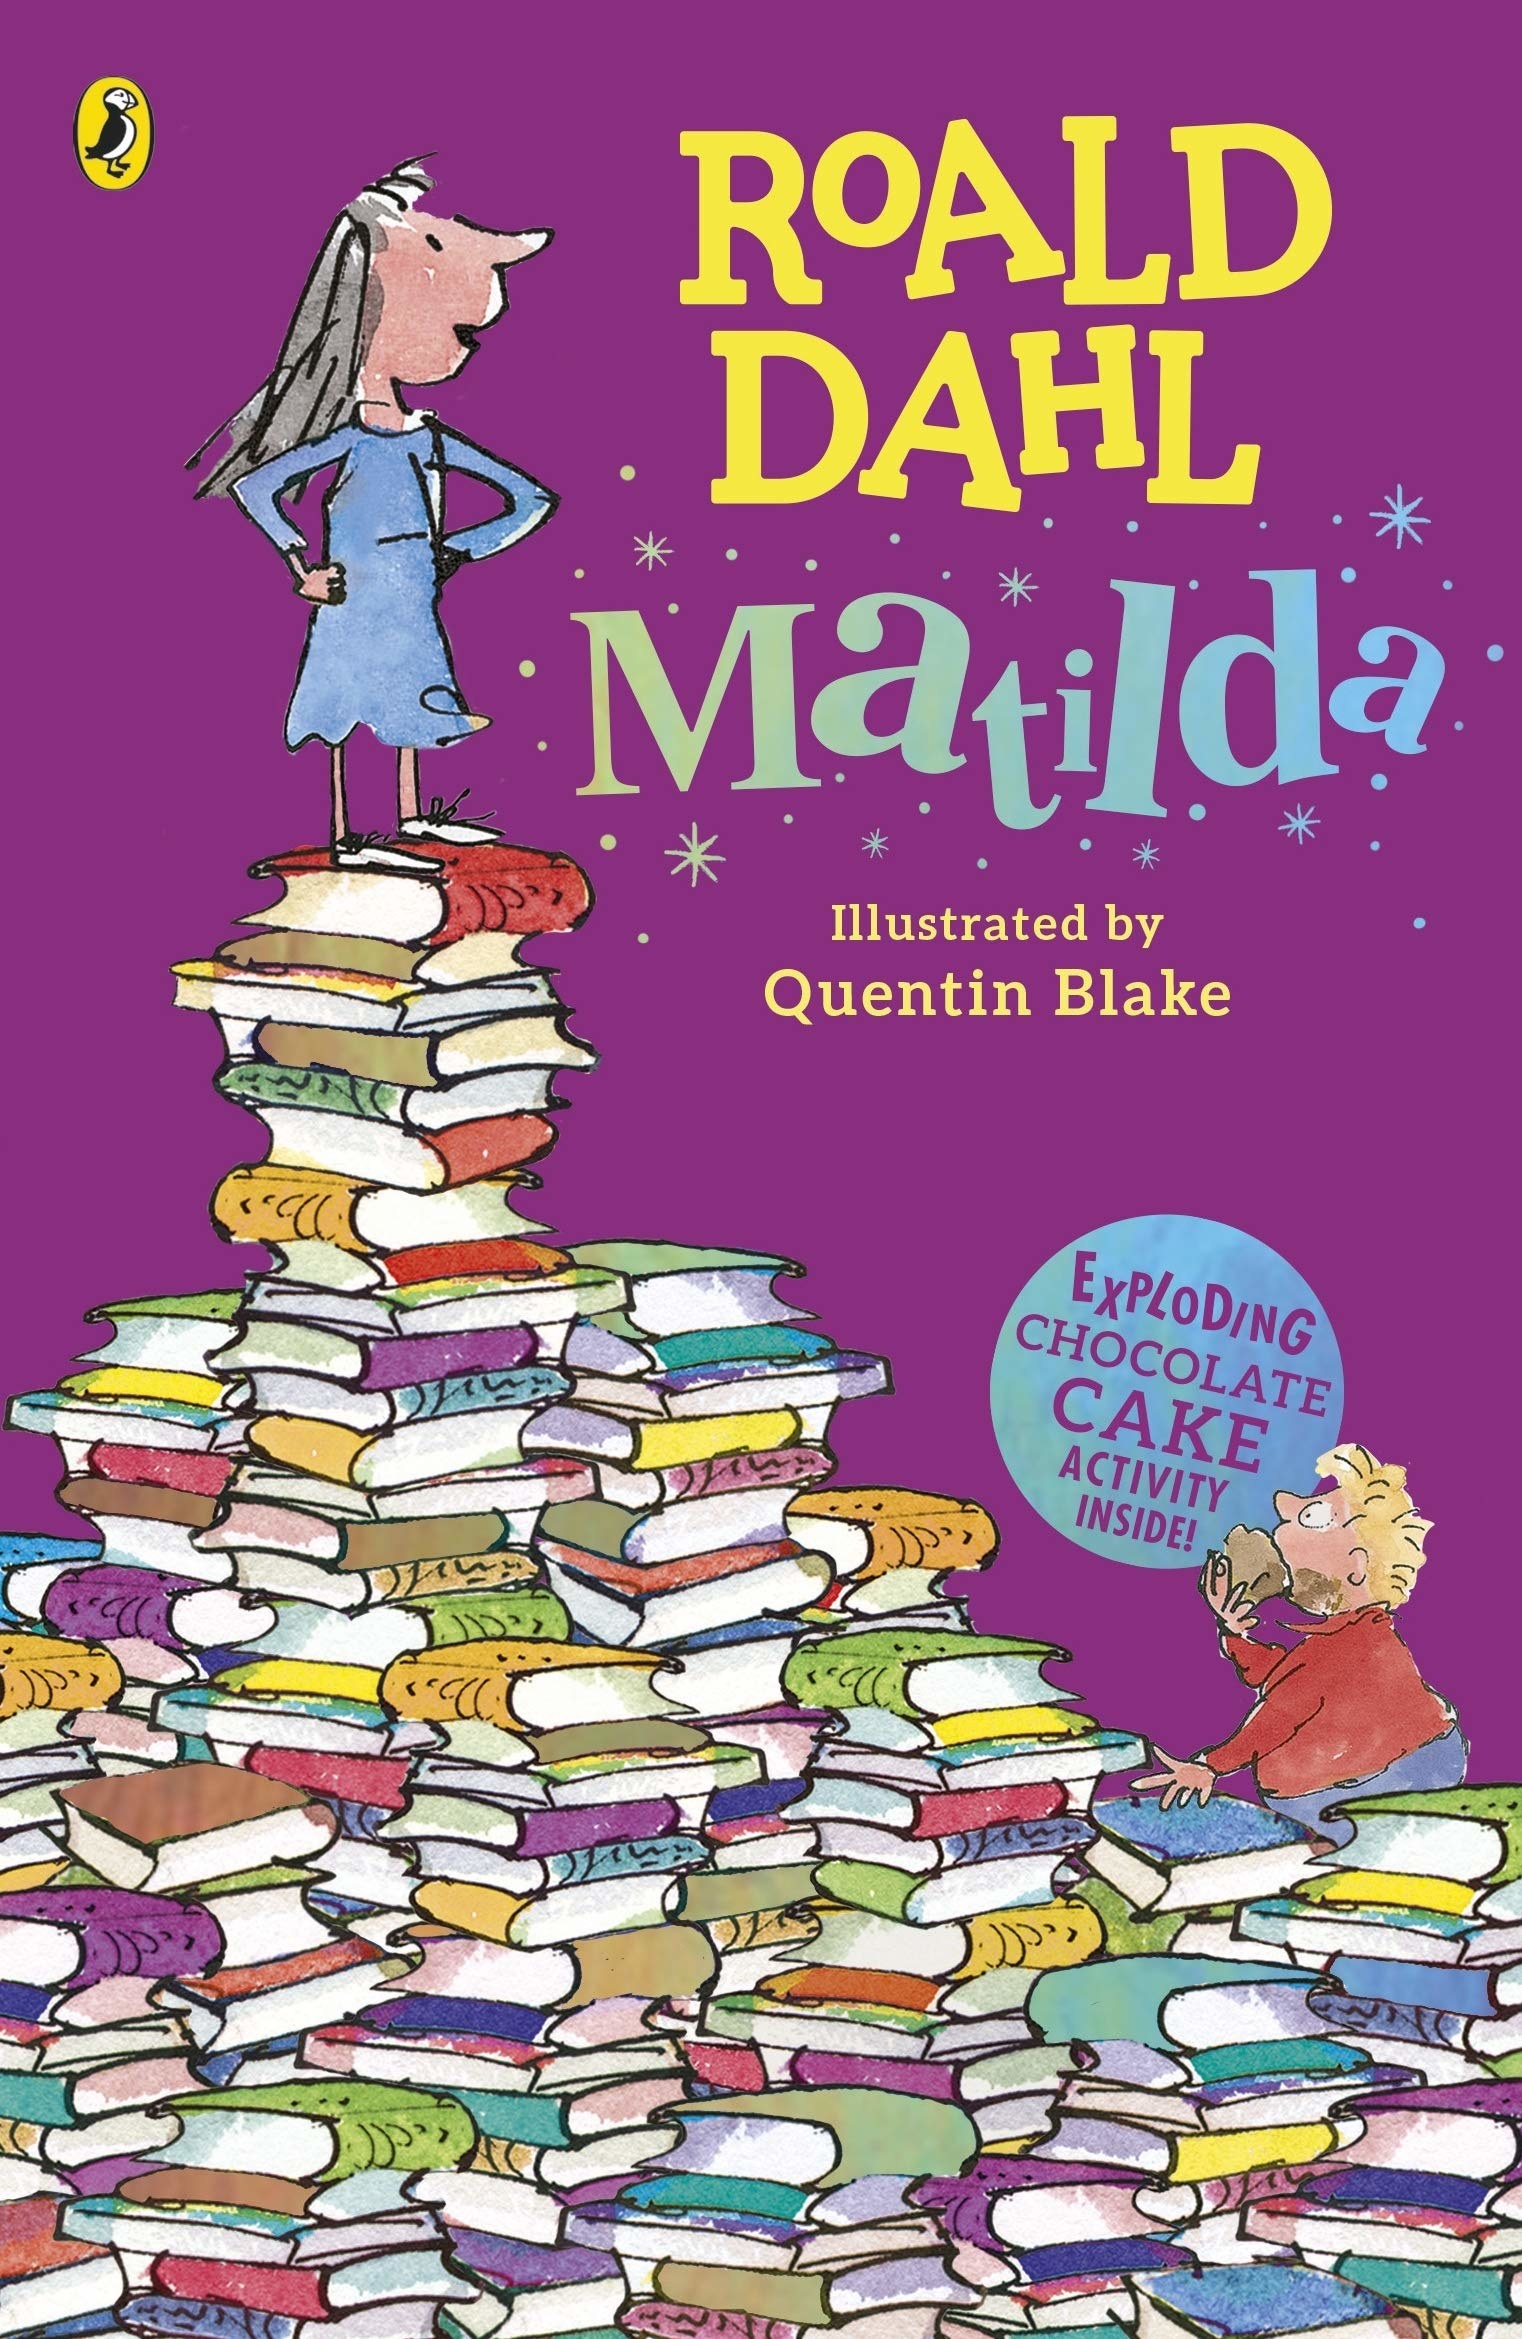 The cover of &quot;Matilda&quot; by Roald Dahl.